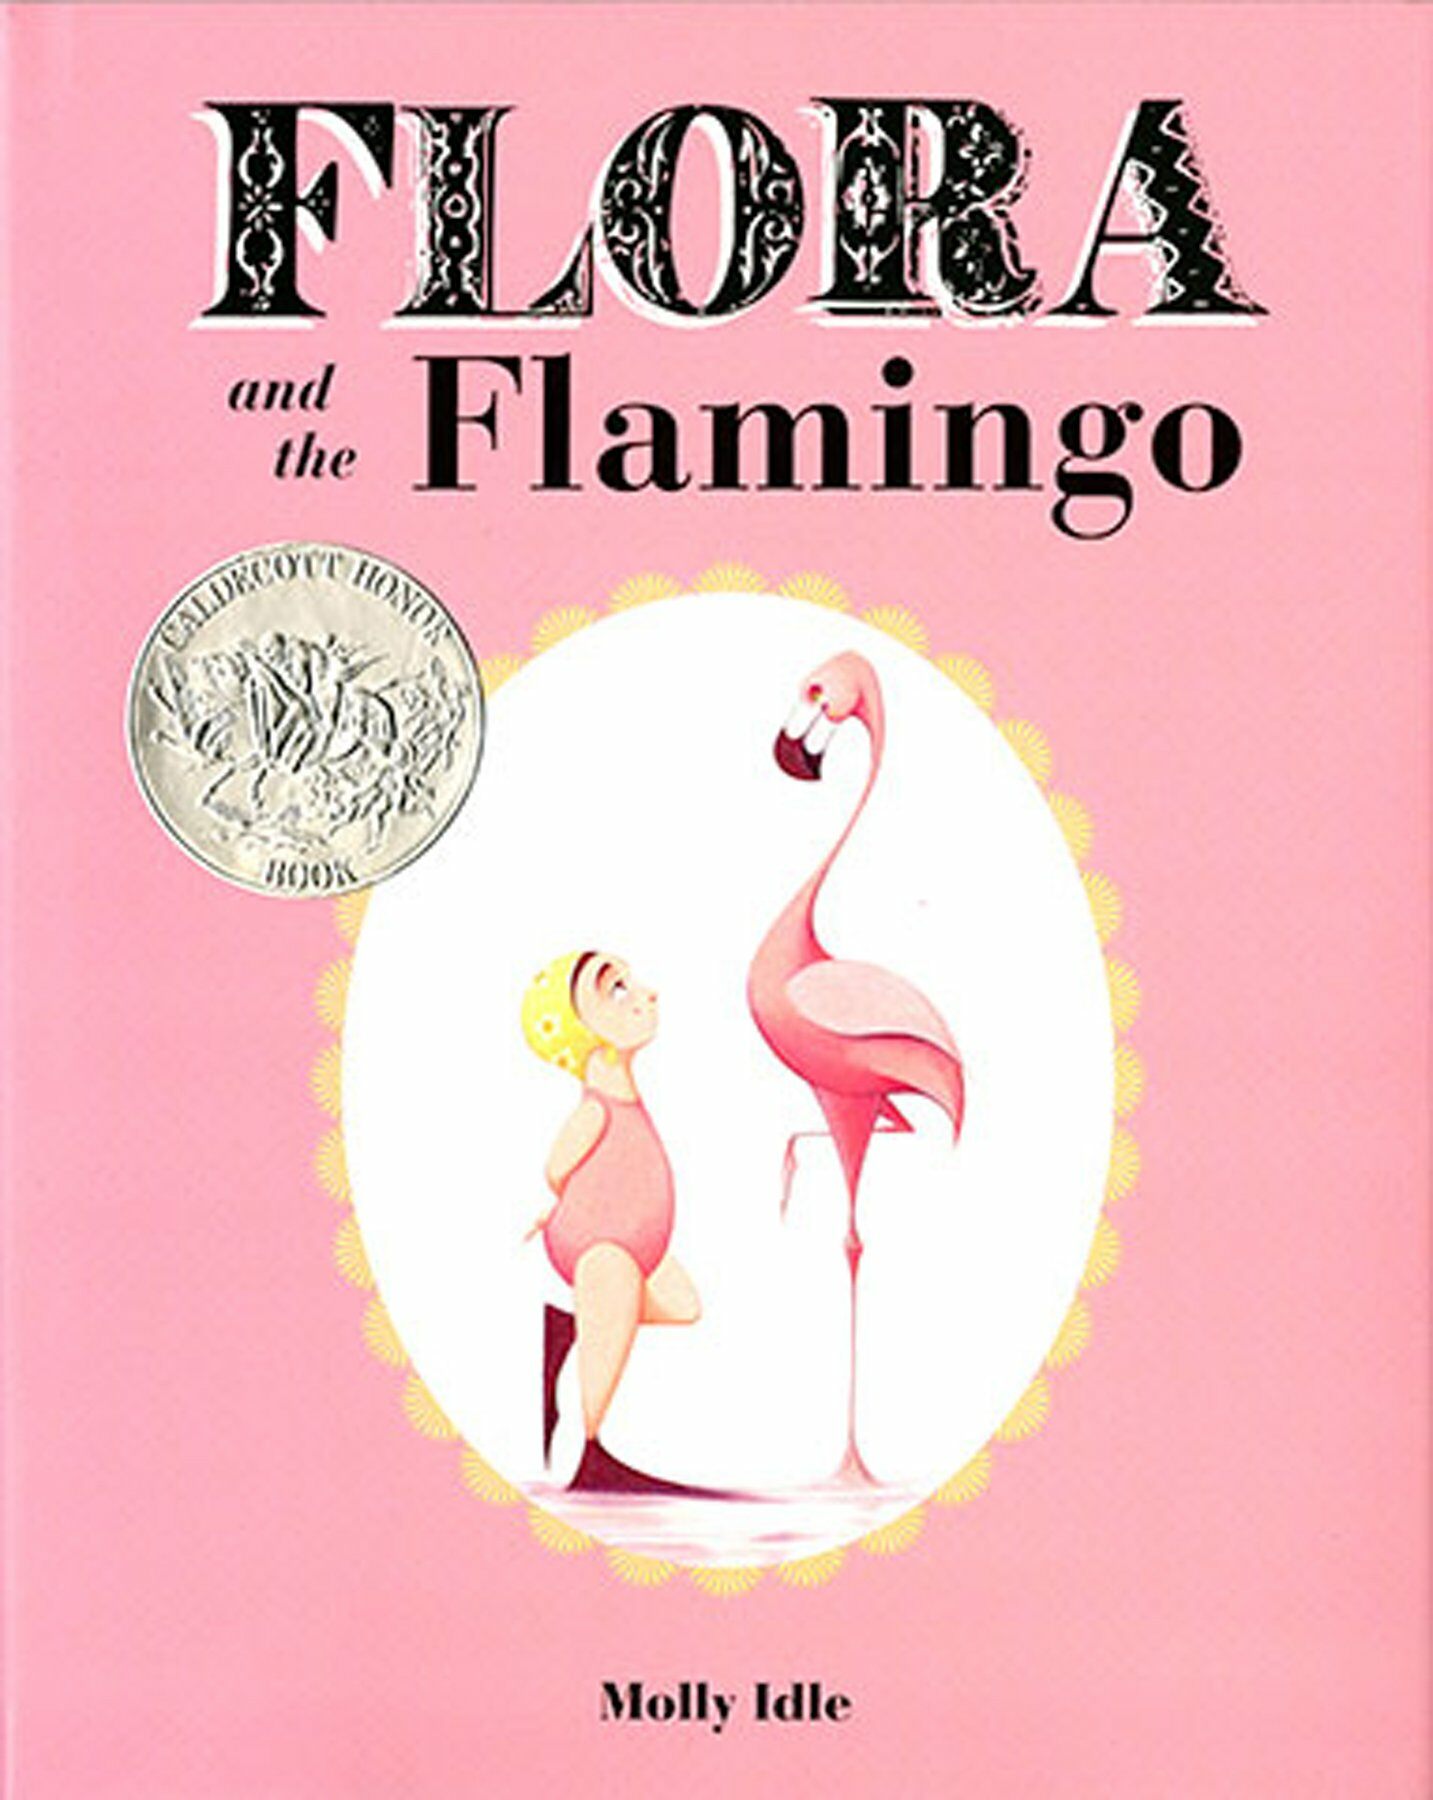 Flora and the Flamingo (Hardcover)